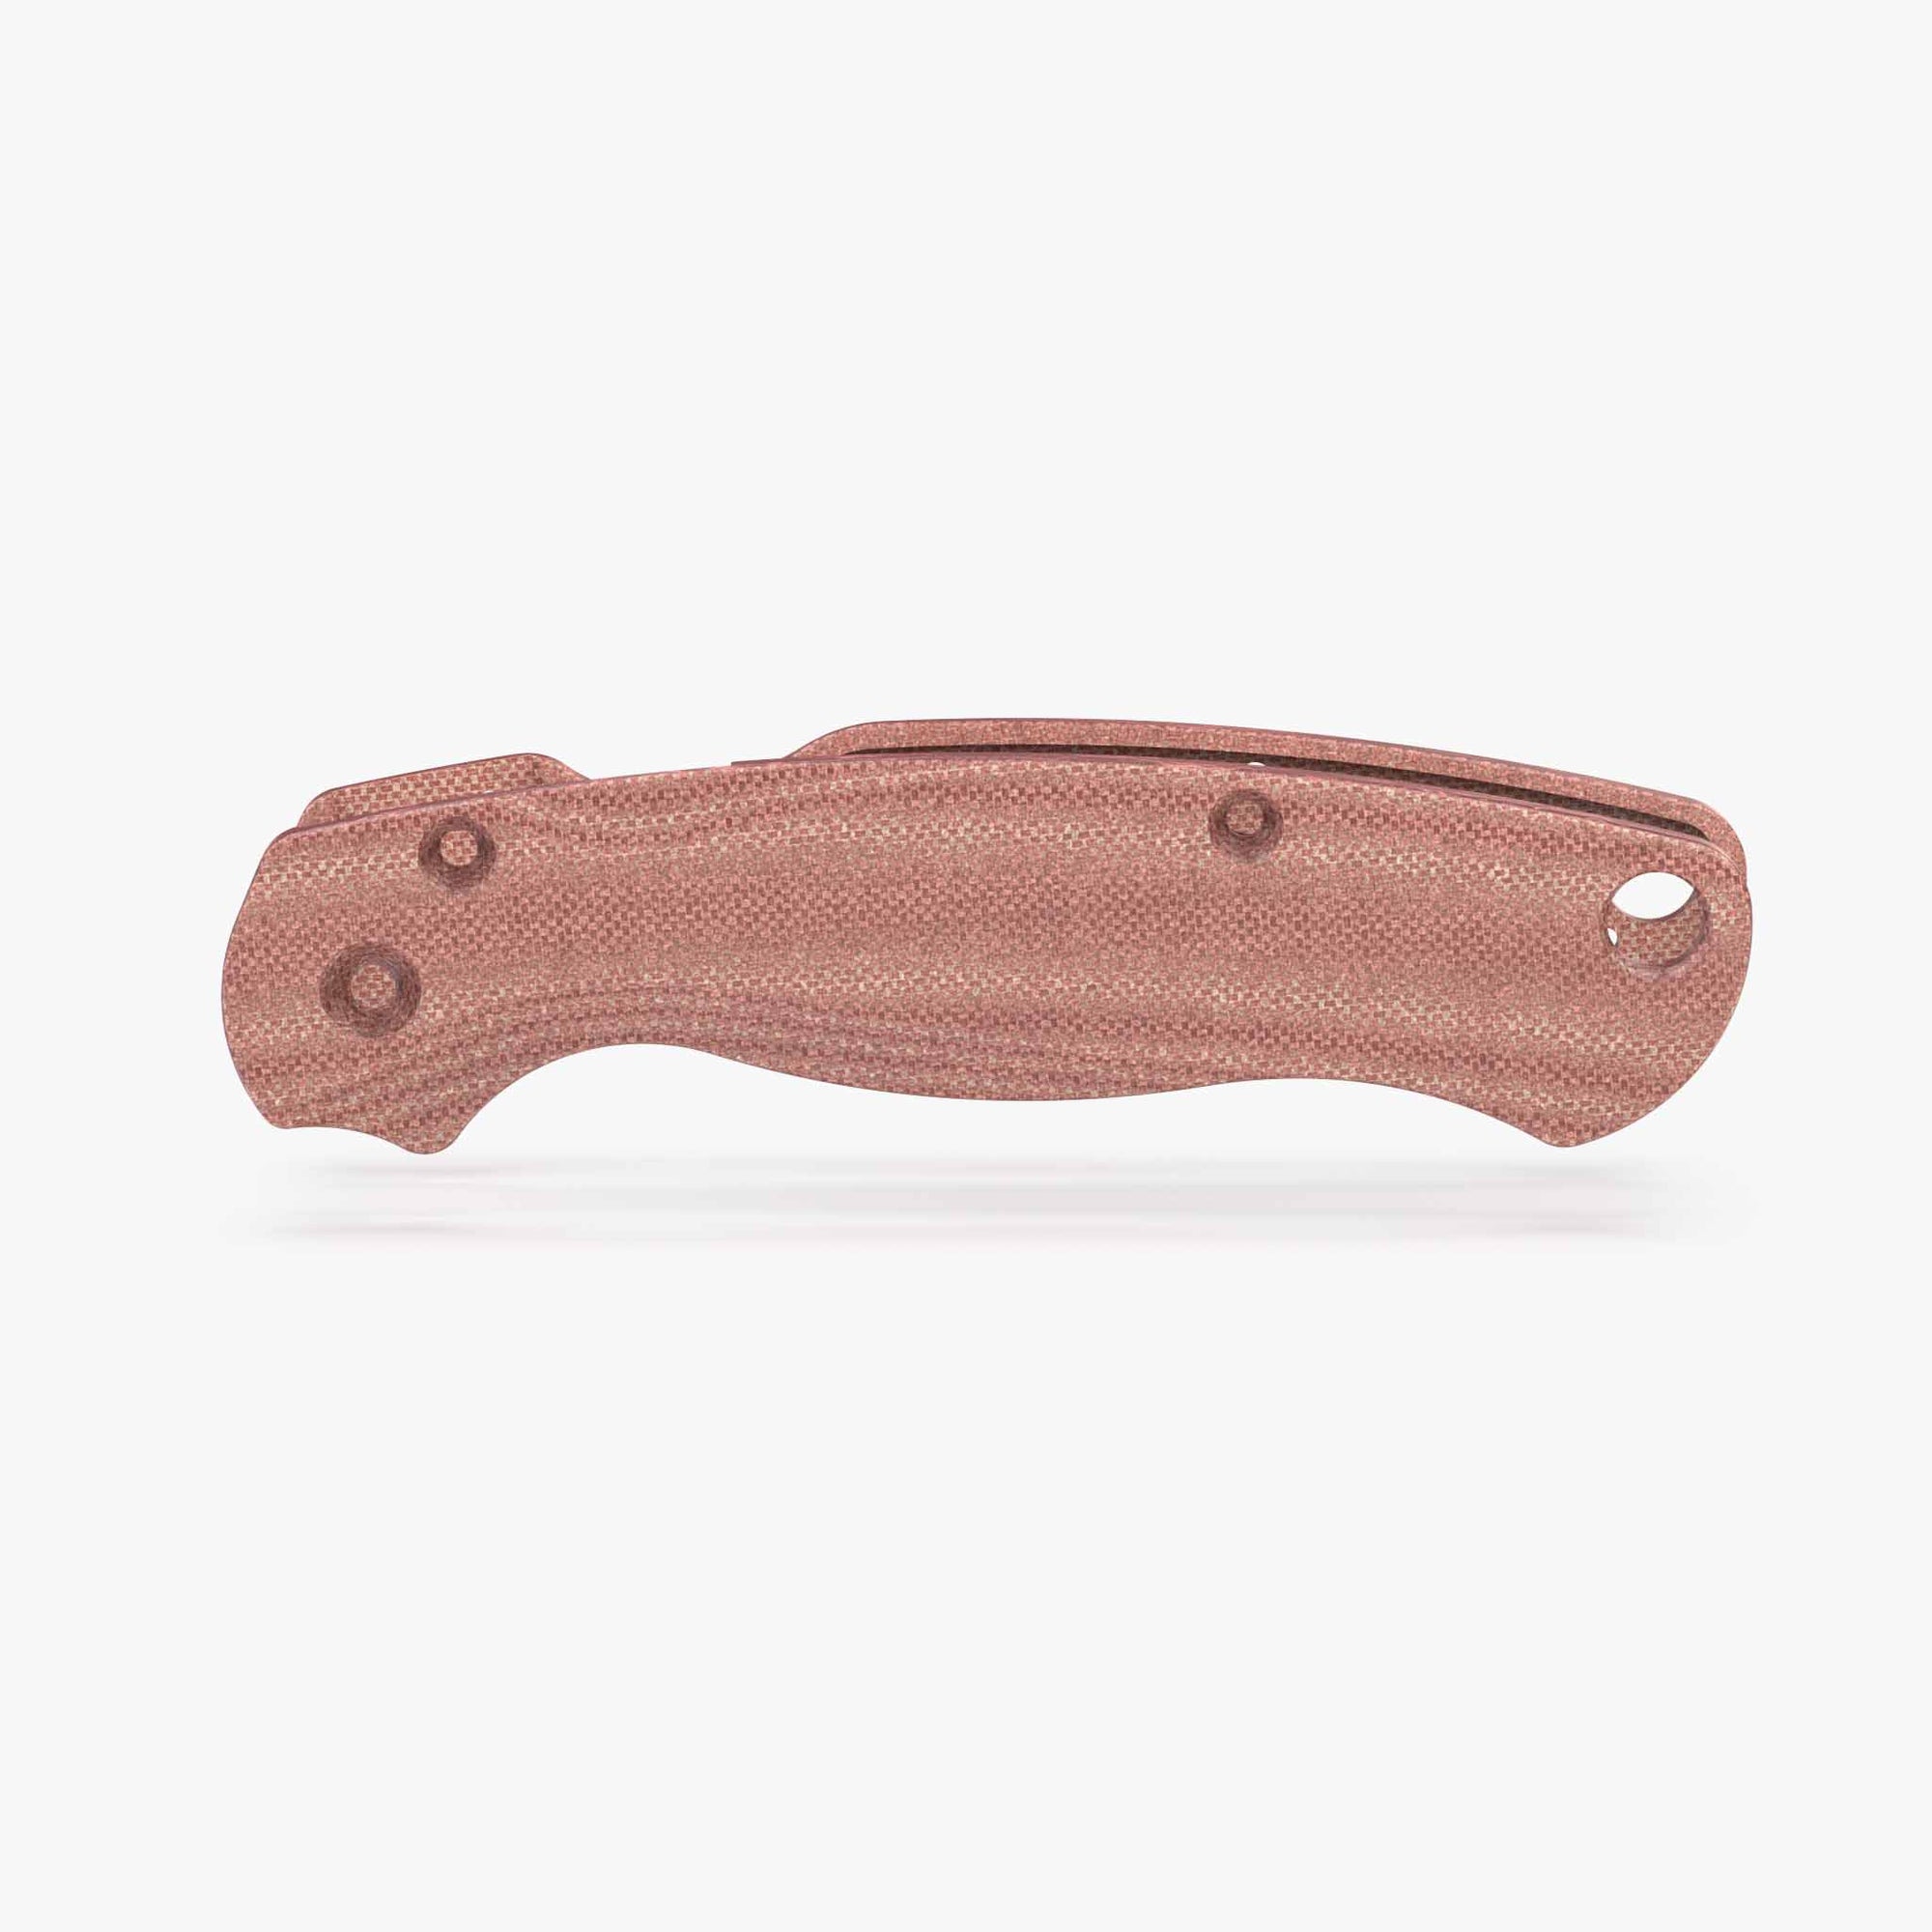 Limited Edition Lotus Scales for Spyderco Paramilitary 2